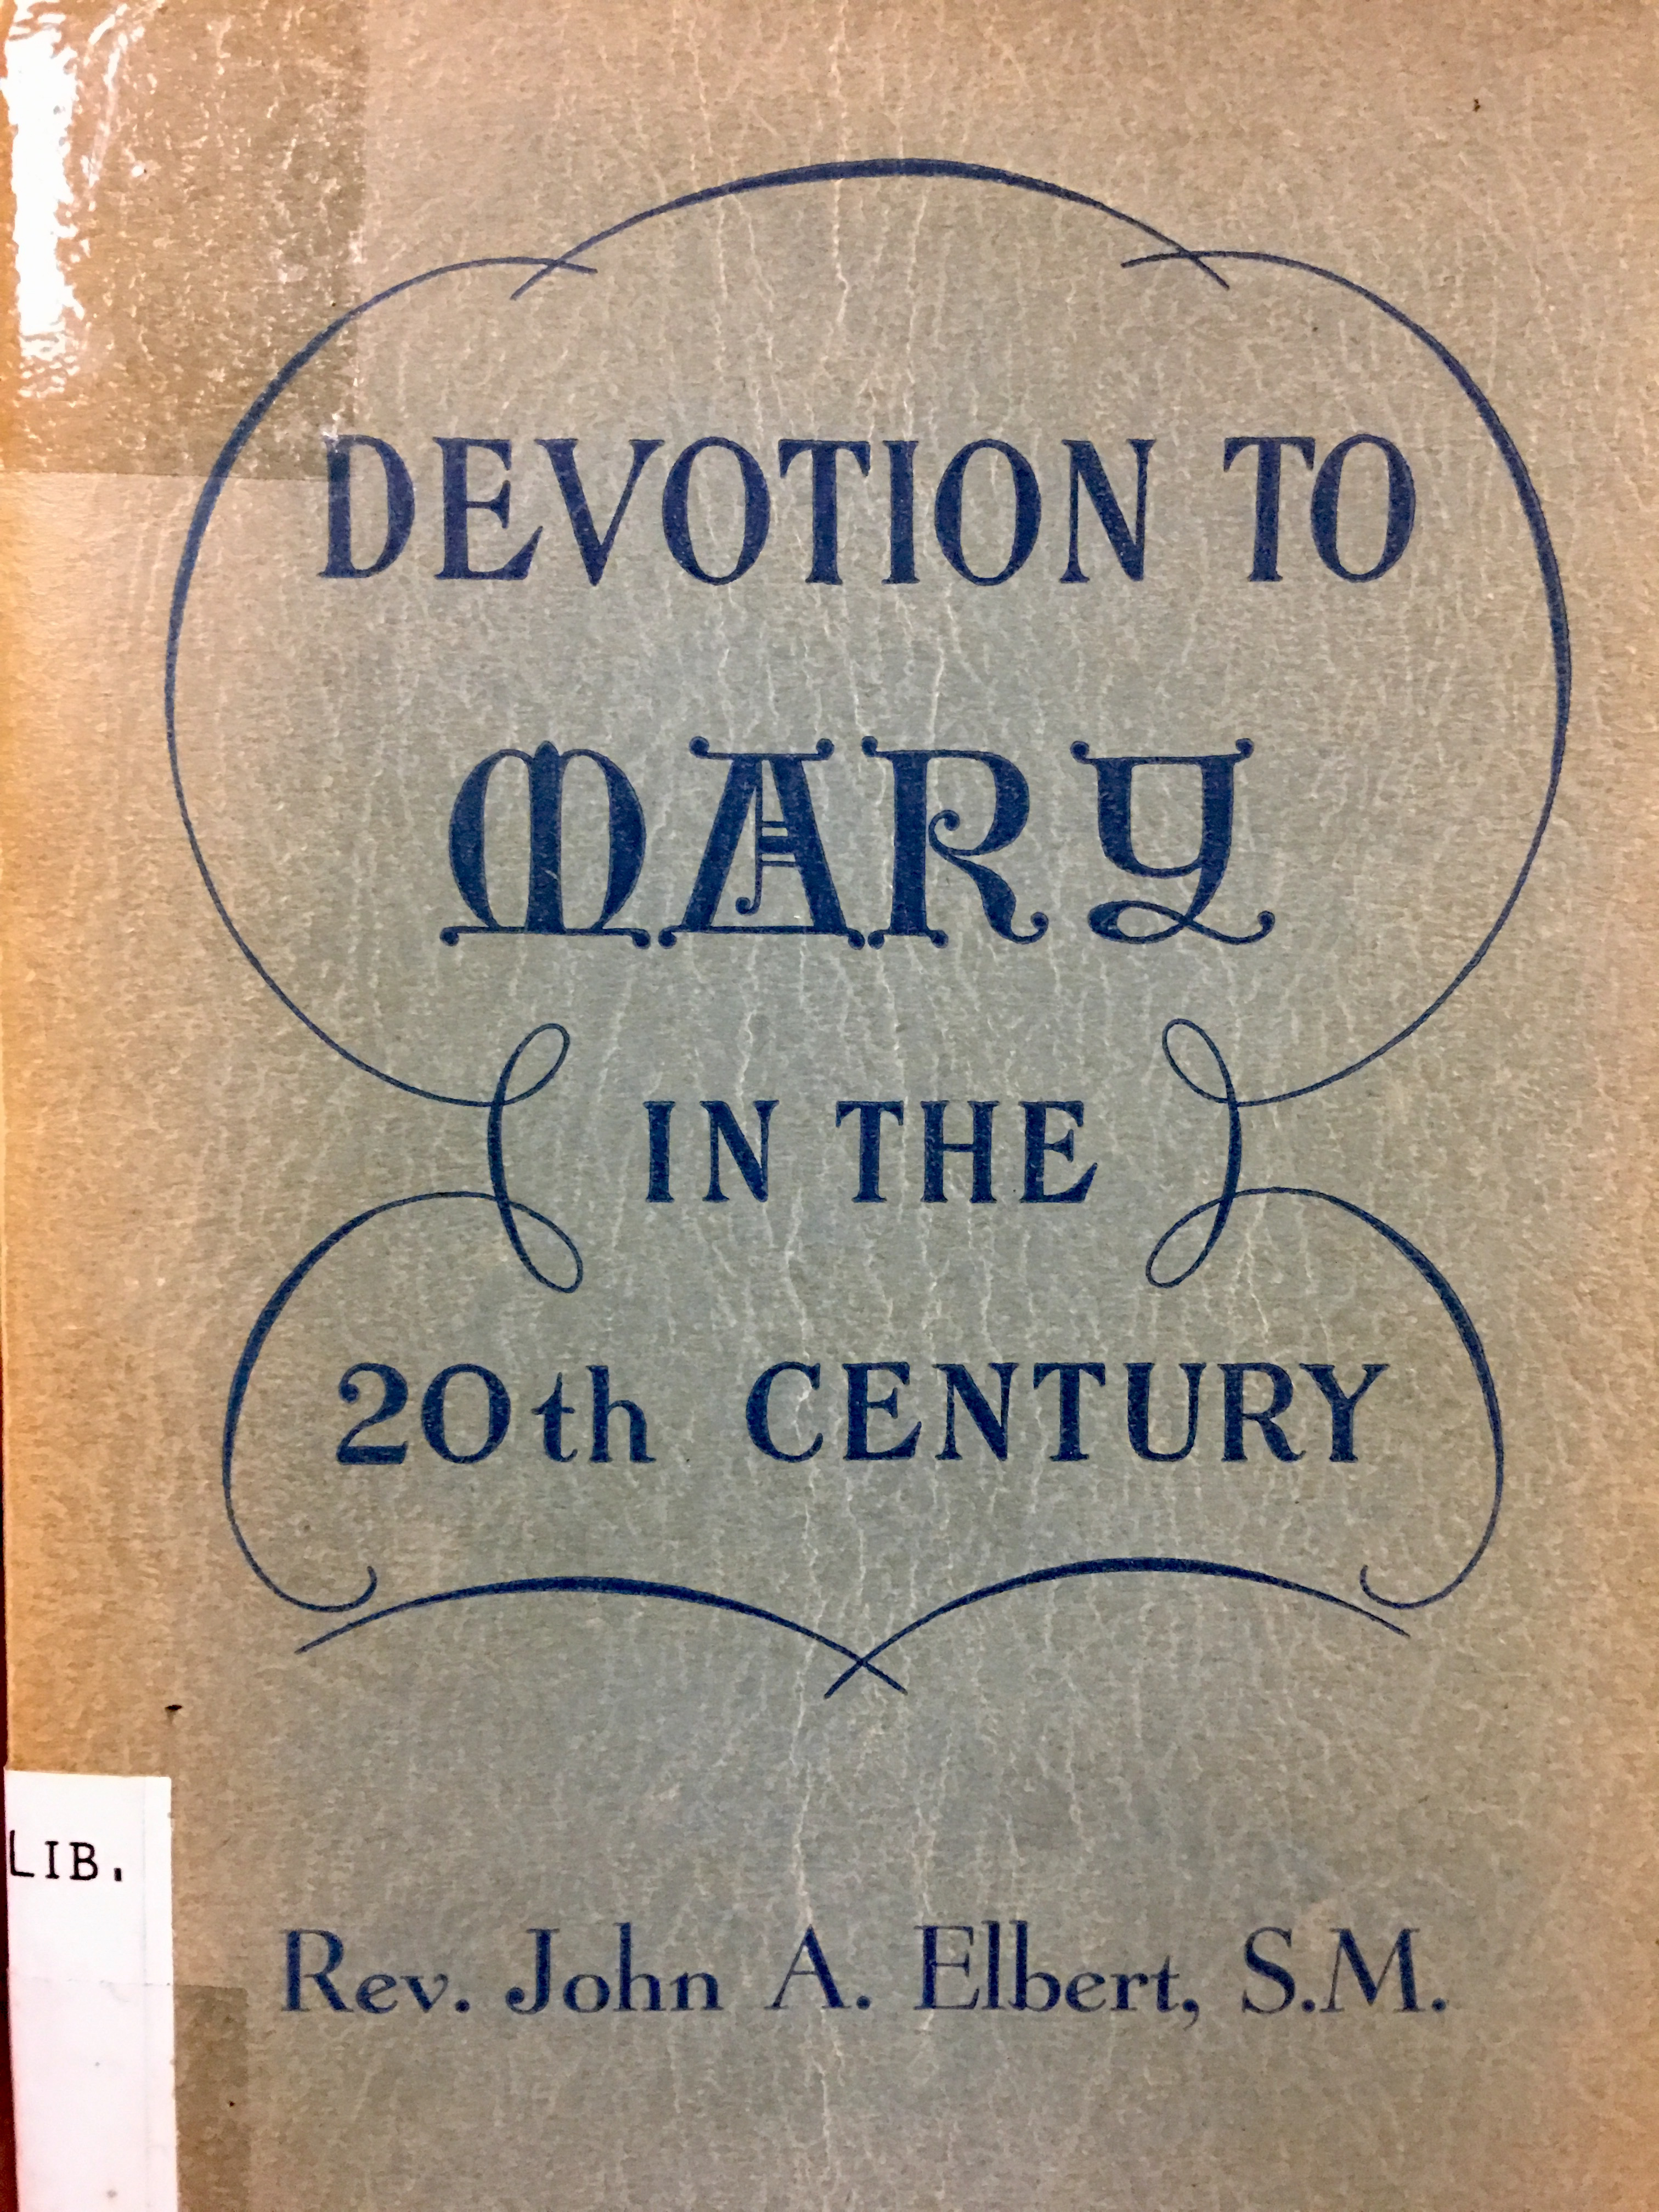 The Marian Library’s first book 